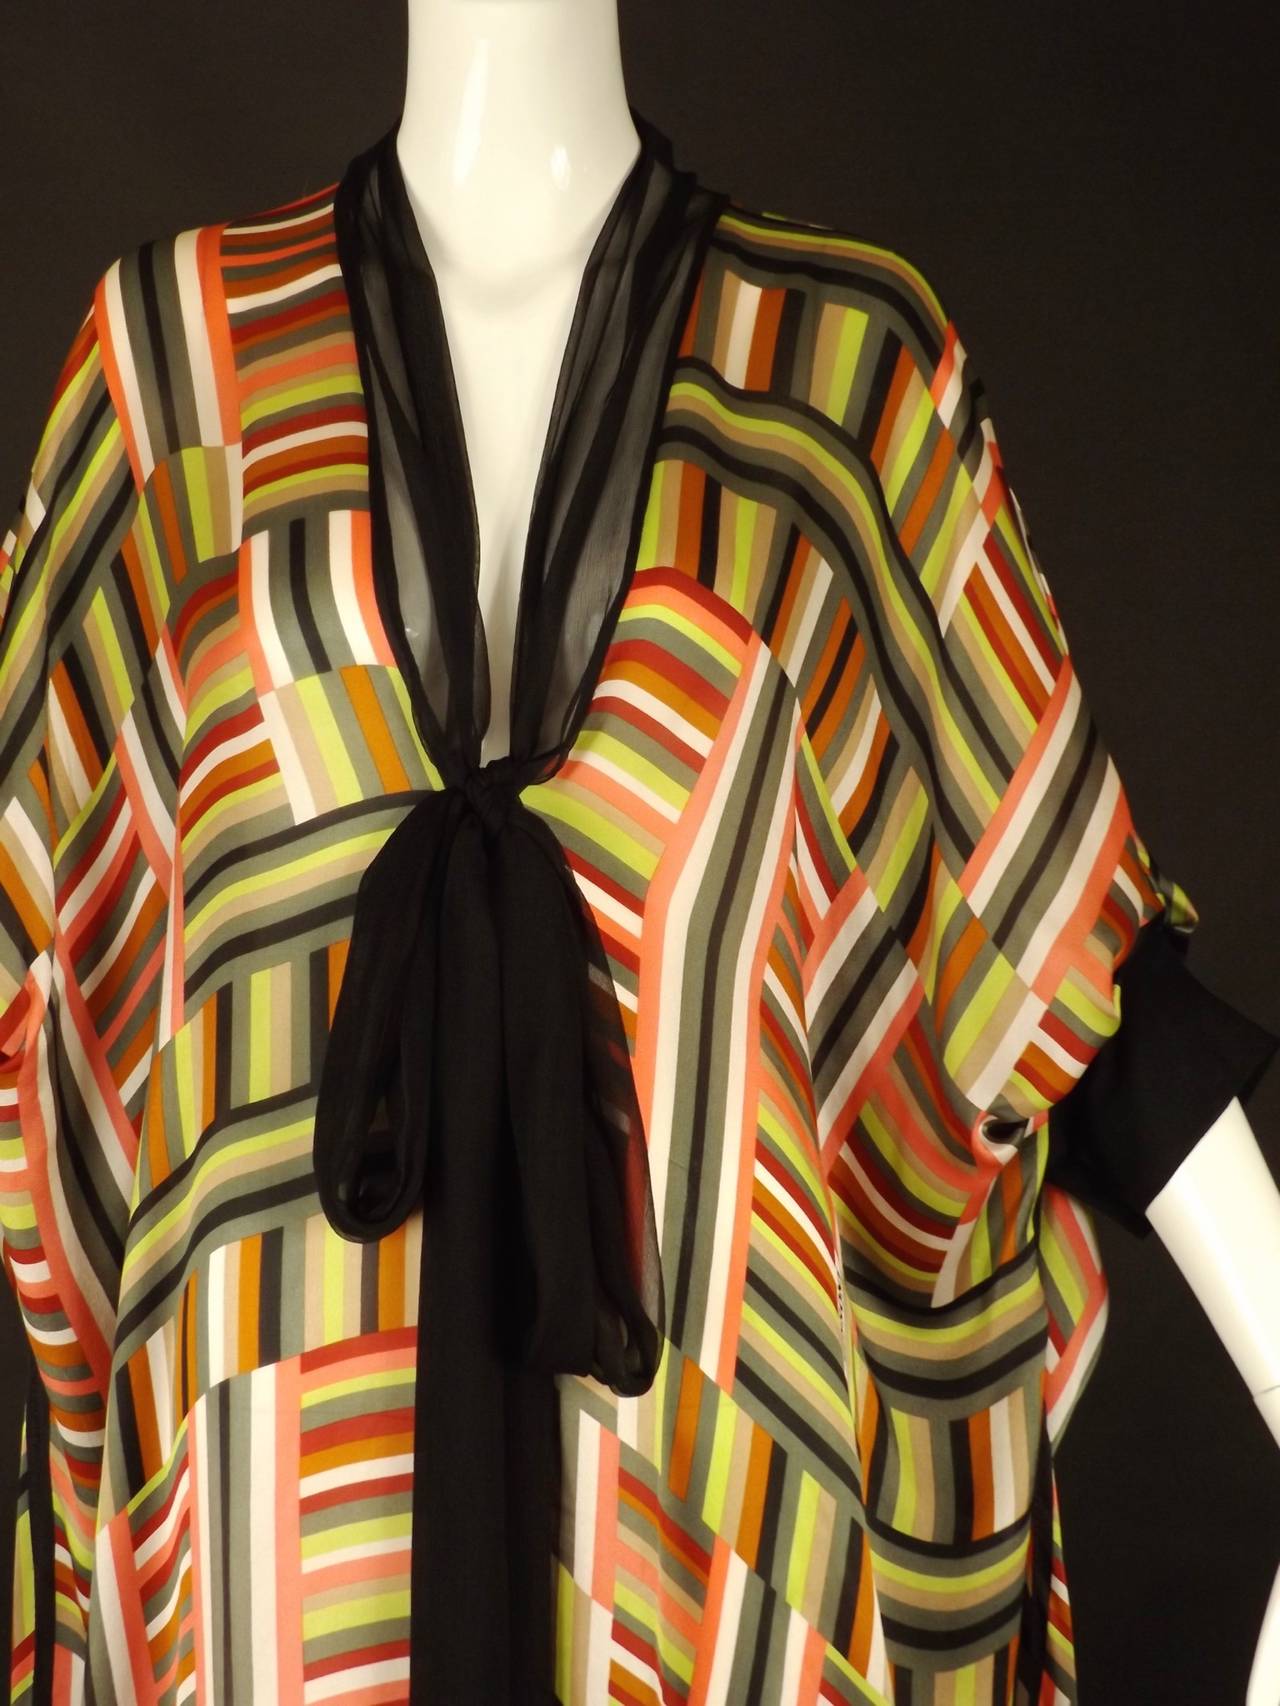 Awesome 1990s kaftan in a multi color stripe and geometric patterned silk chiffon. Plunging neckline edged in black chiffon with a long neck tie down the front. The upper sides are pleated into the black button closing cuffs. Slits down the side